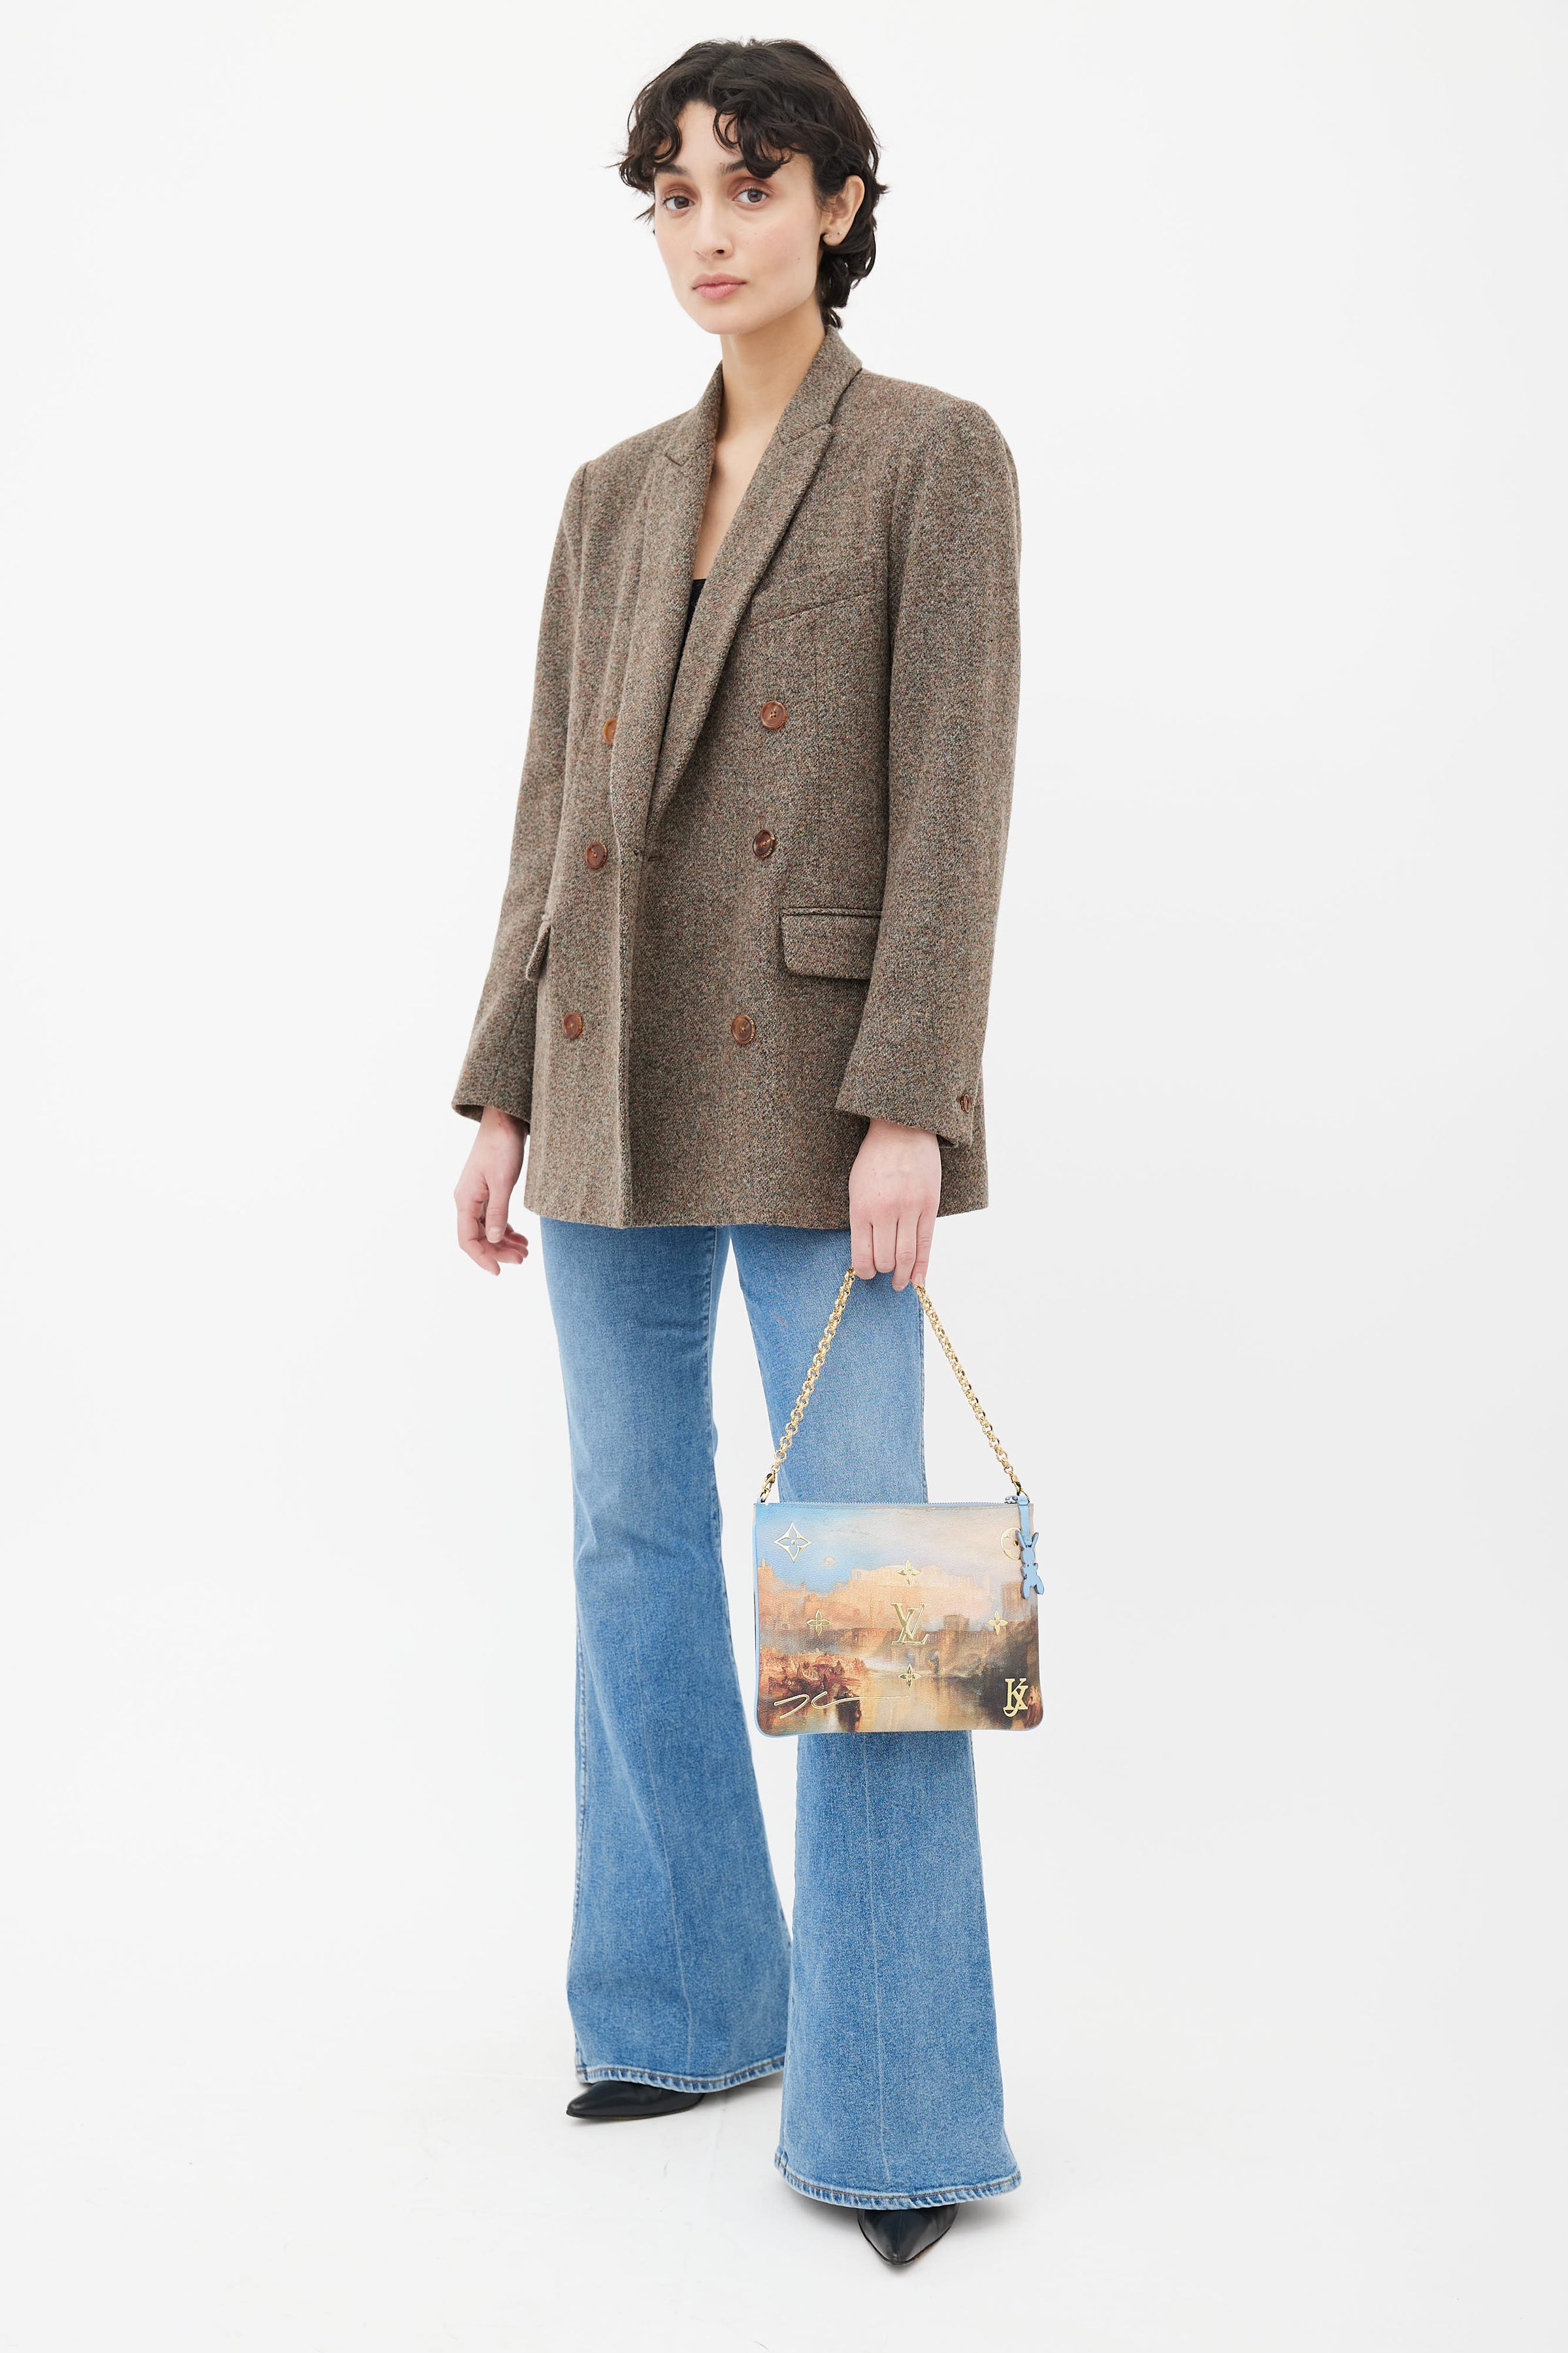 Louis Vuitton - Lady of the Lake: Léa Seydoux with a Monet bag from the  latest Masters collaboration between Jeff Koons and Louis Vuitton. Now  available in selected stores worldwide. See more